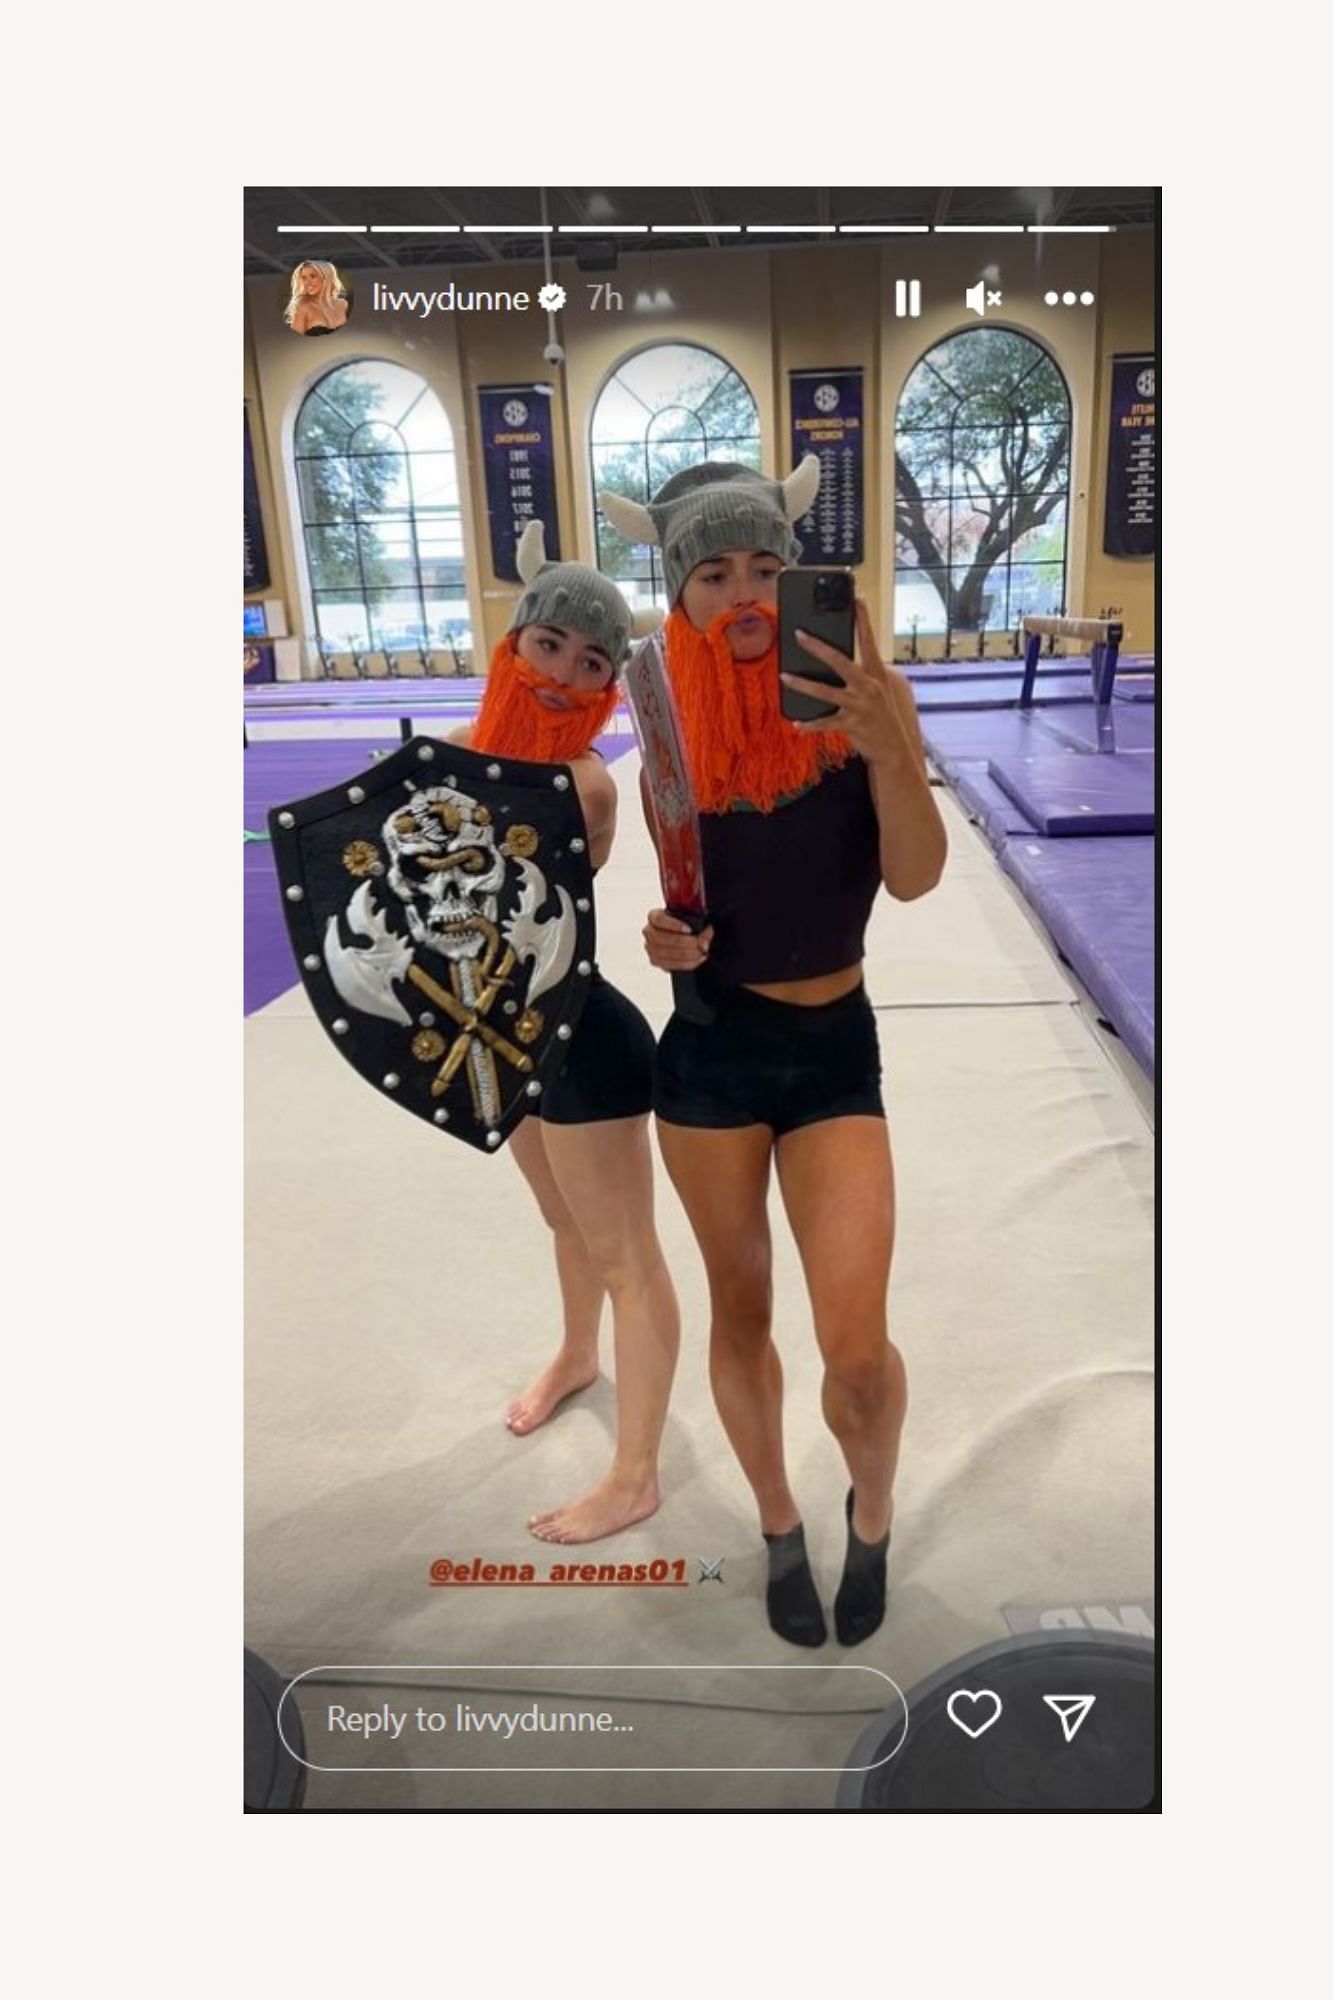 LSU gymnast Olivia Dunne with her teammate in Halloween outfit.